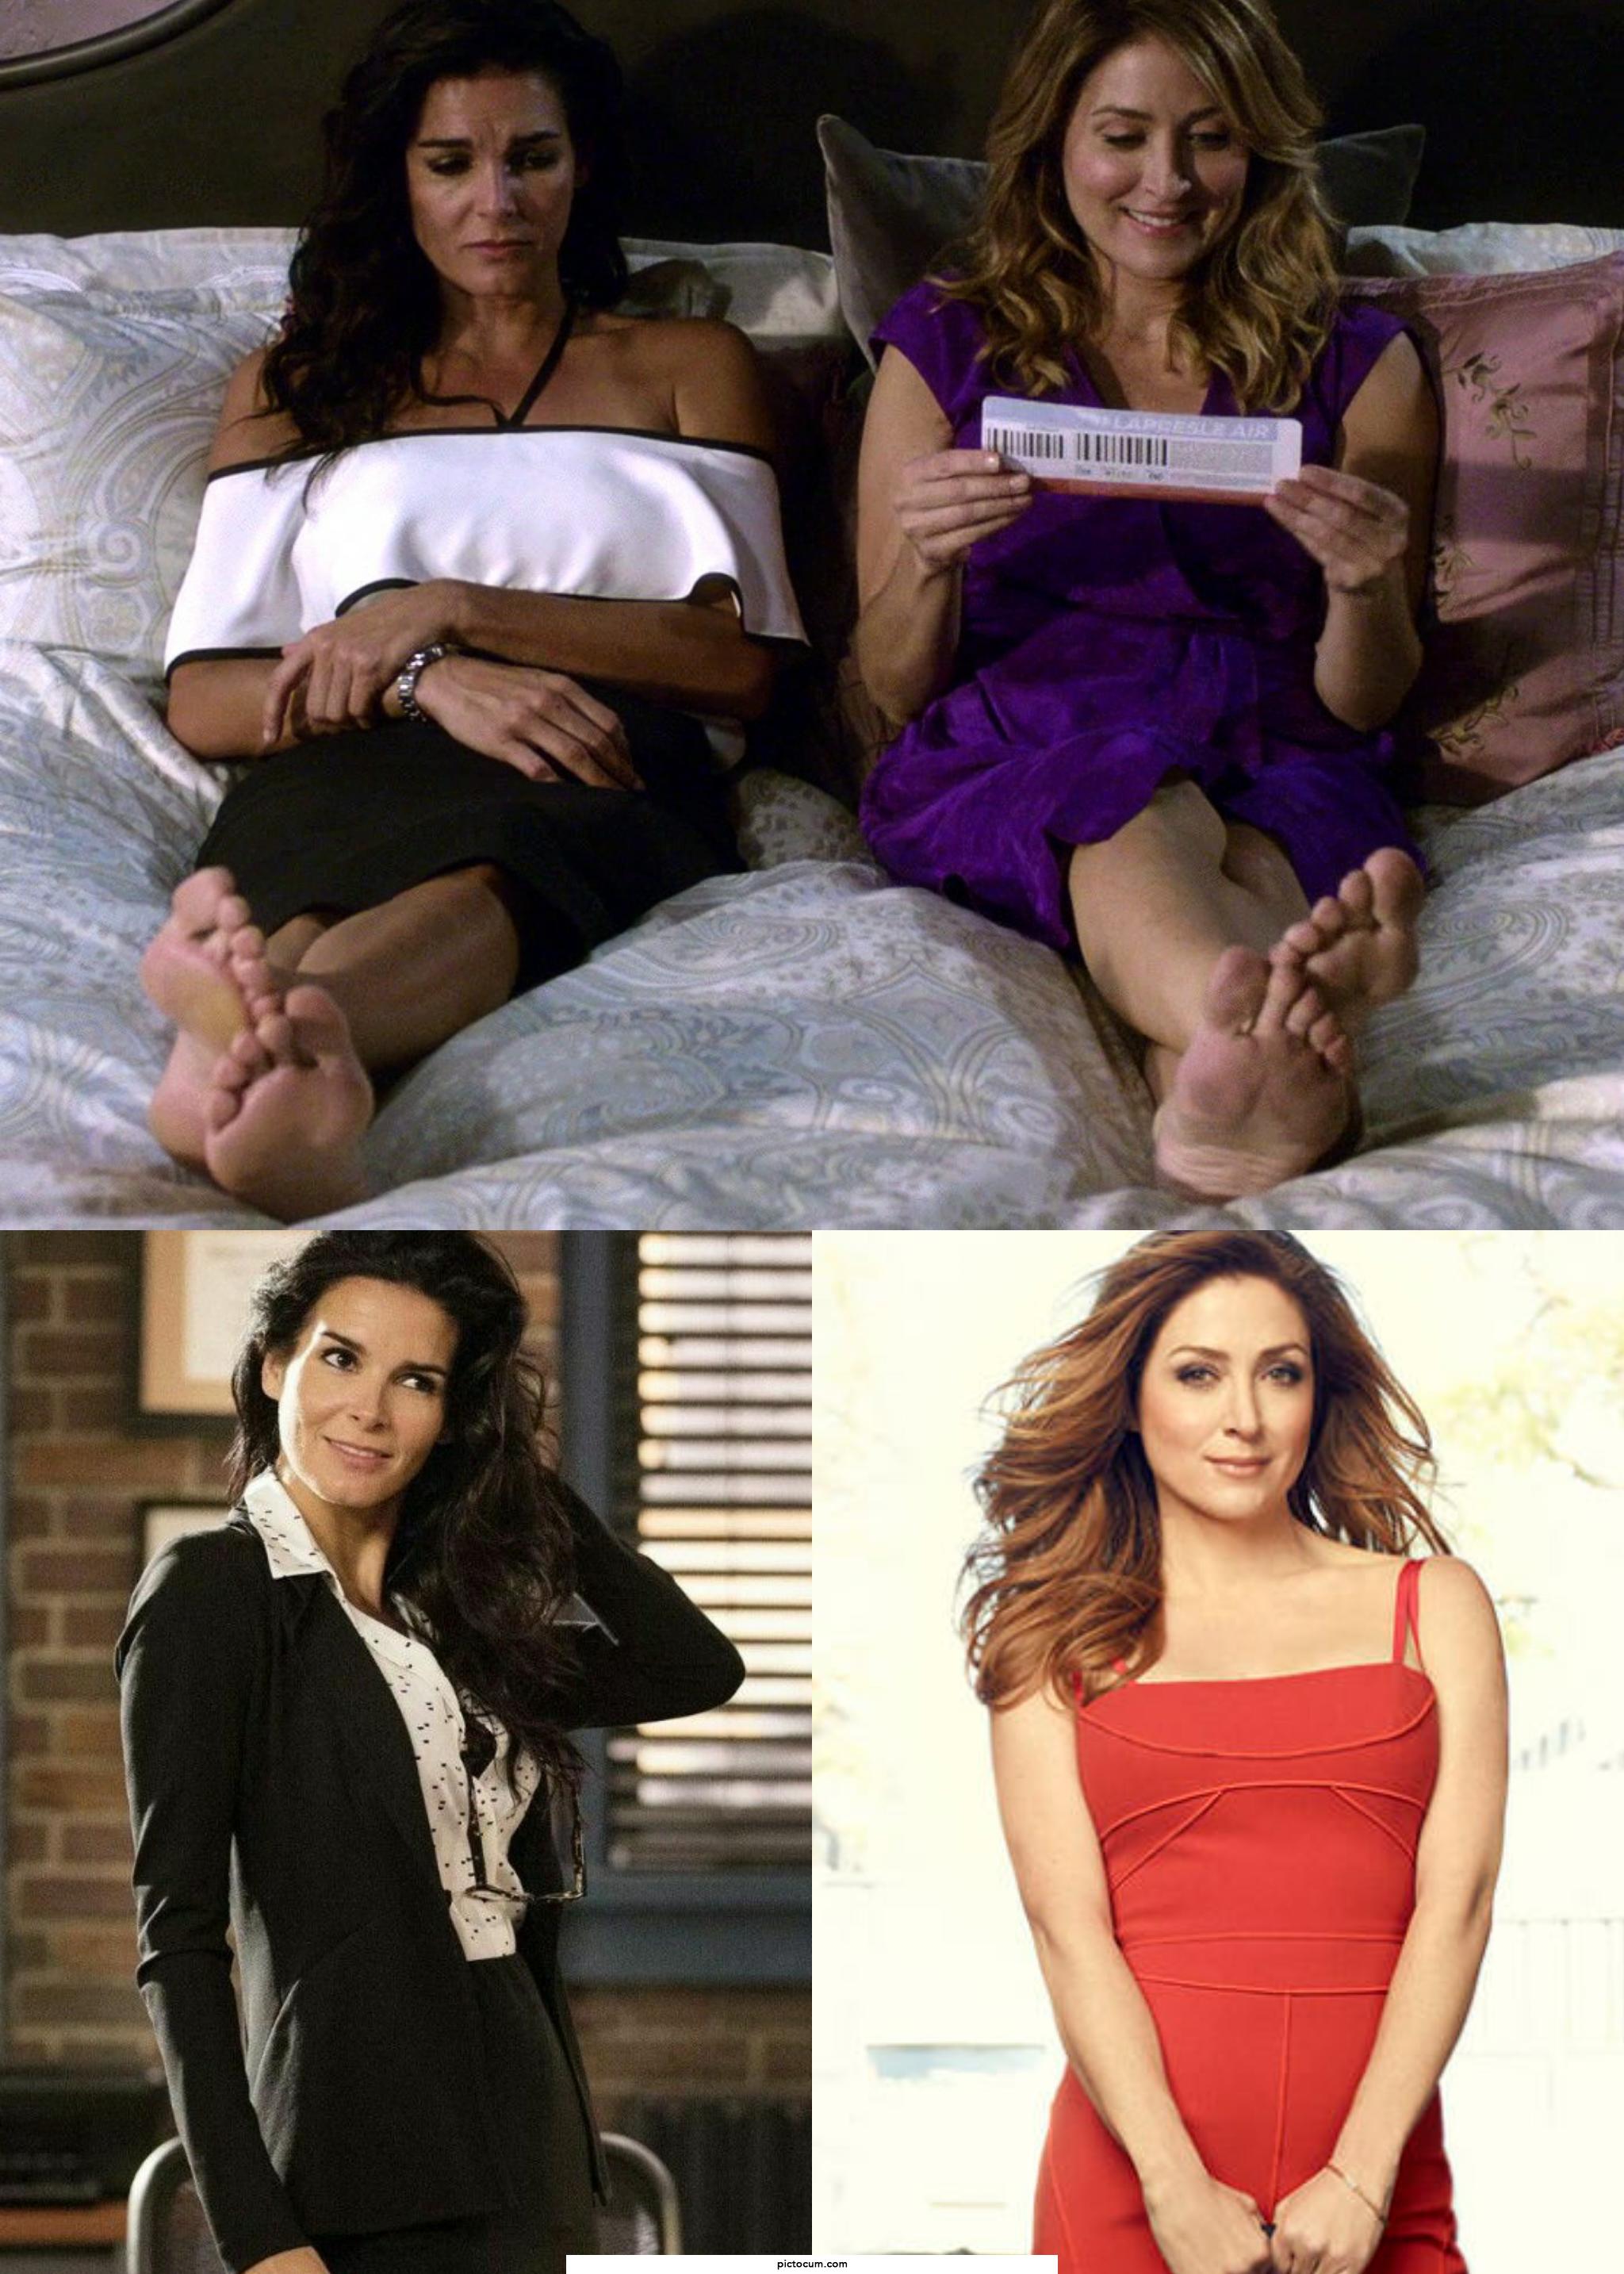 Angie Harmon Feet Porn - I want to spend hours worshipping Angie Harmon & Sasha Alexander's feet  then have an all night threesome | PicToCum